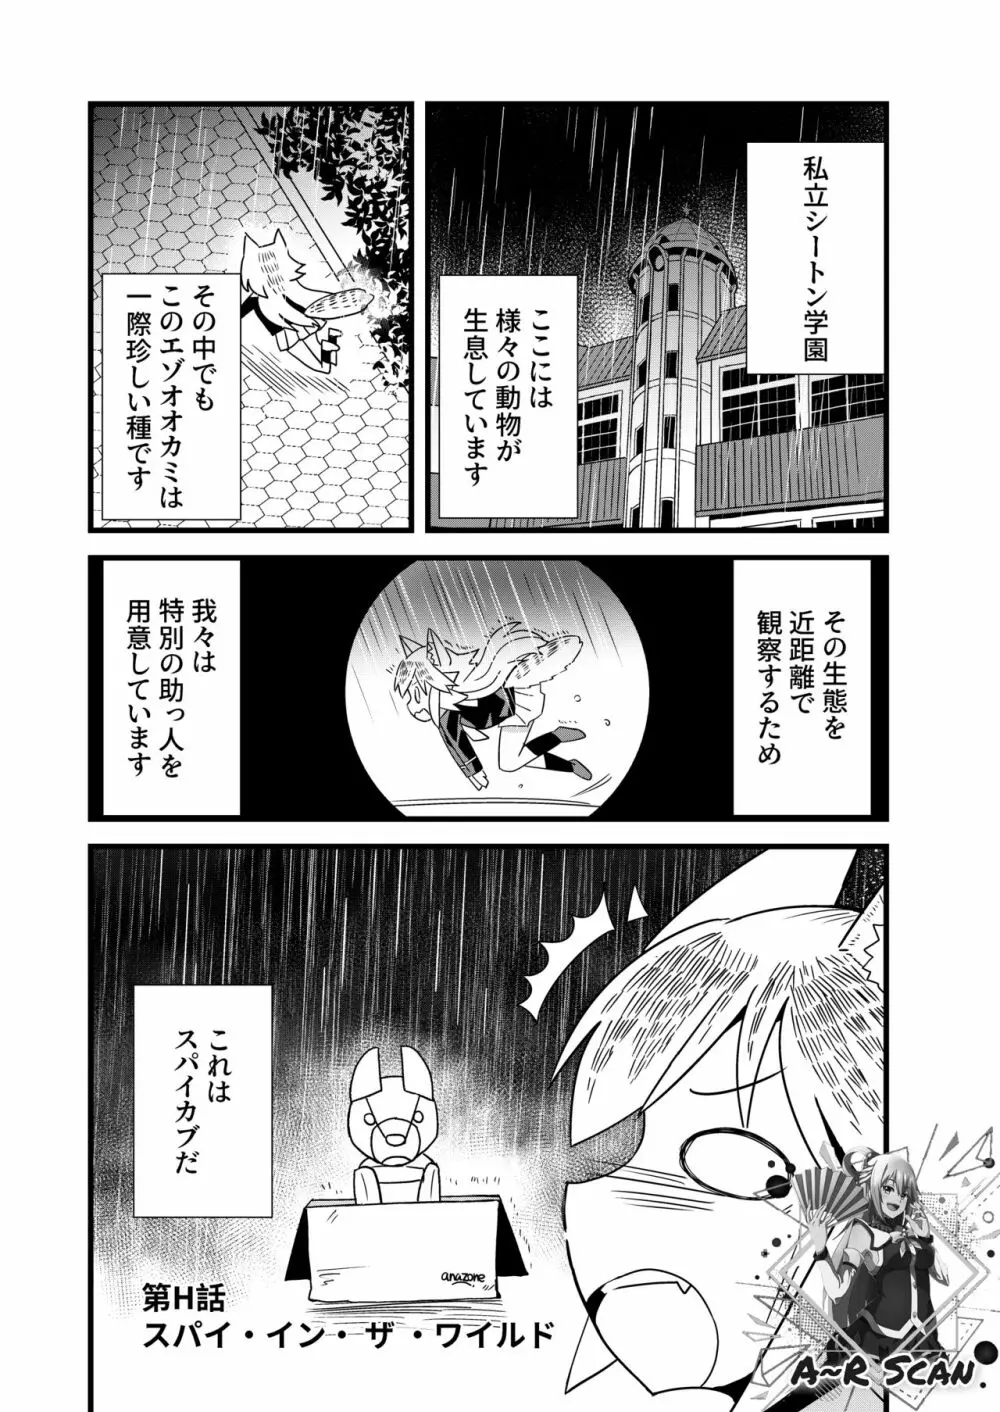 んばっばんばんばんばんばんばっば! - page5